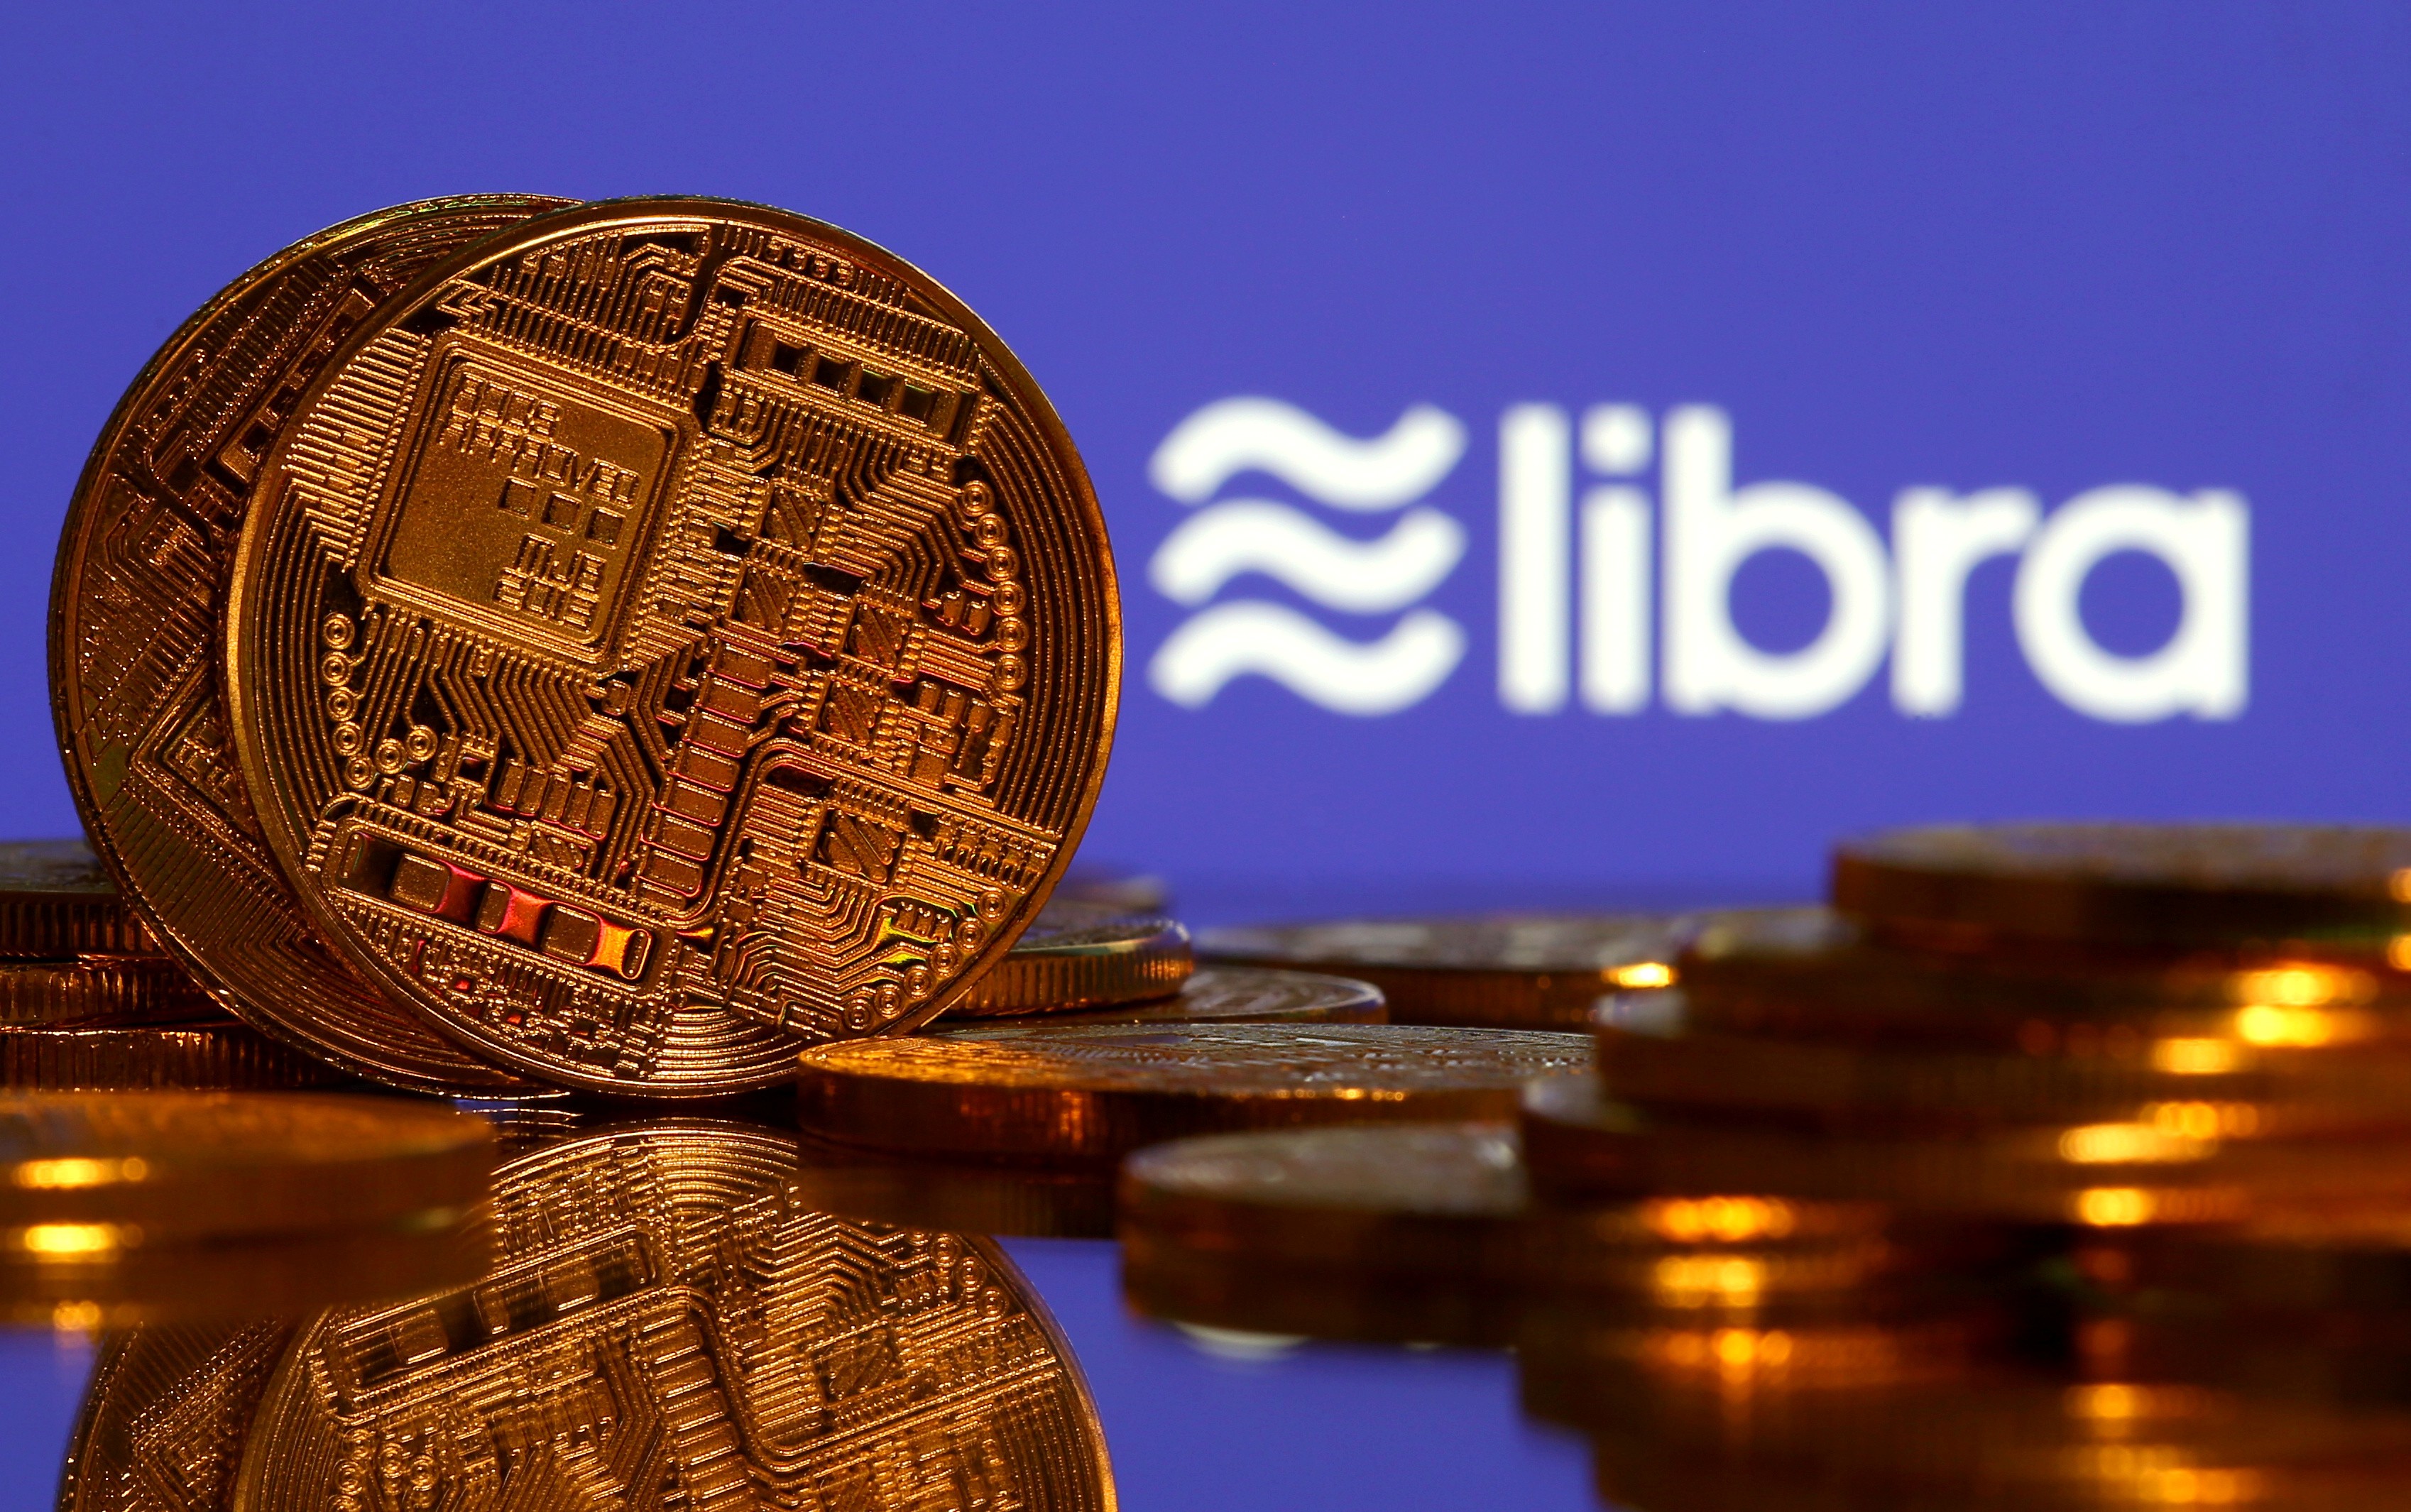 Facebook plans to build a digital currency called Libra. Photo: Reuters